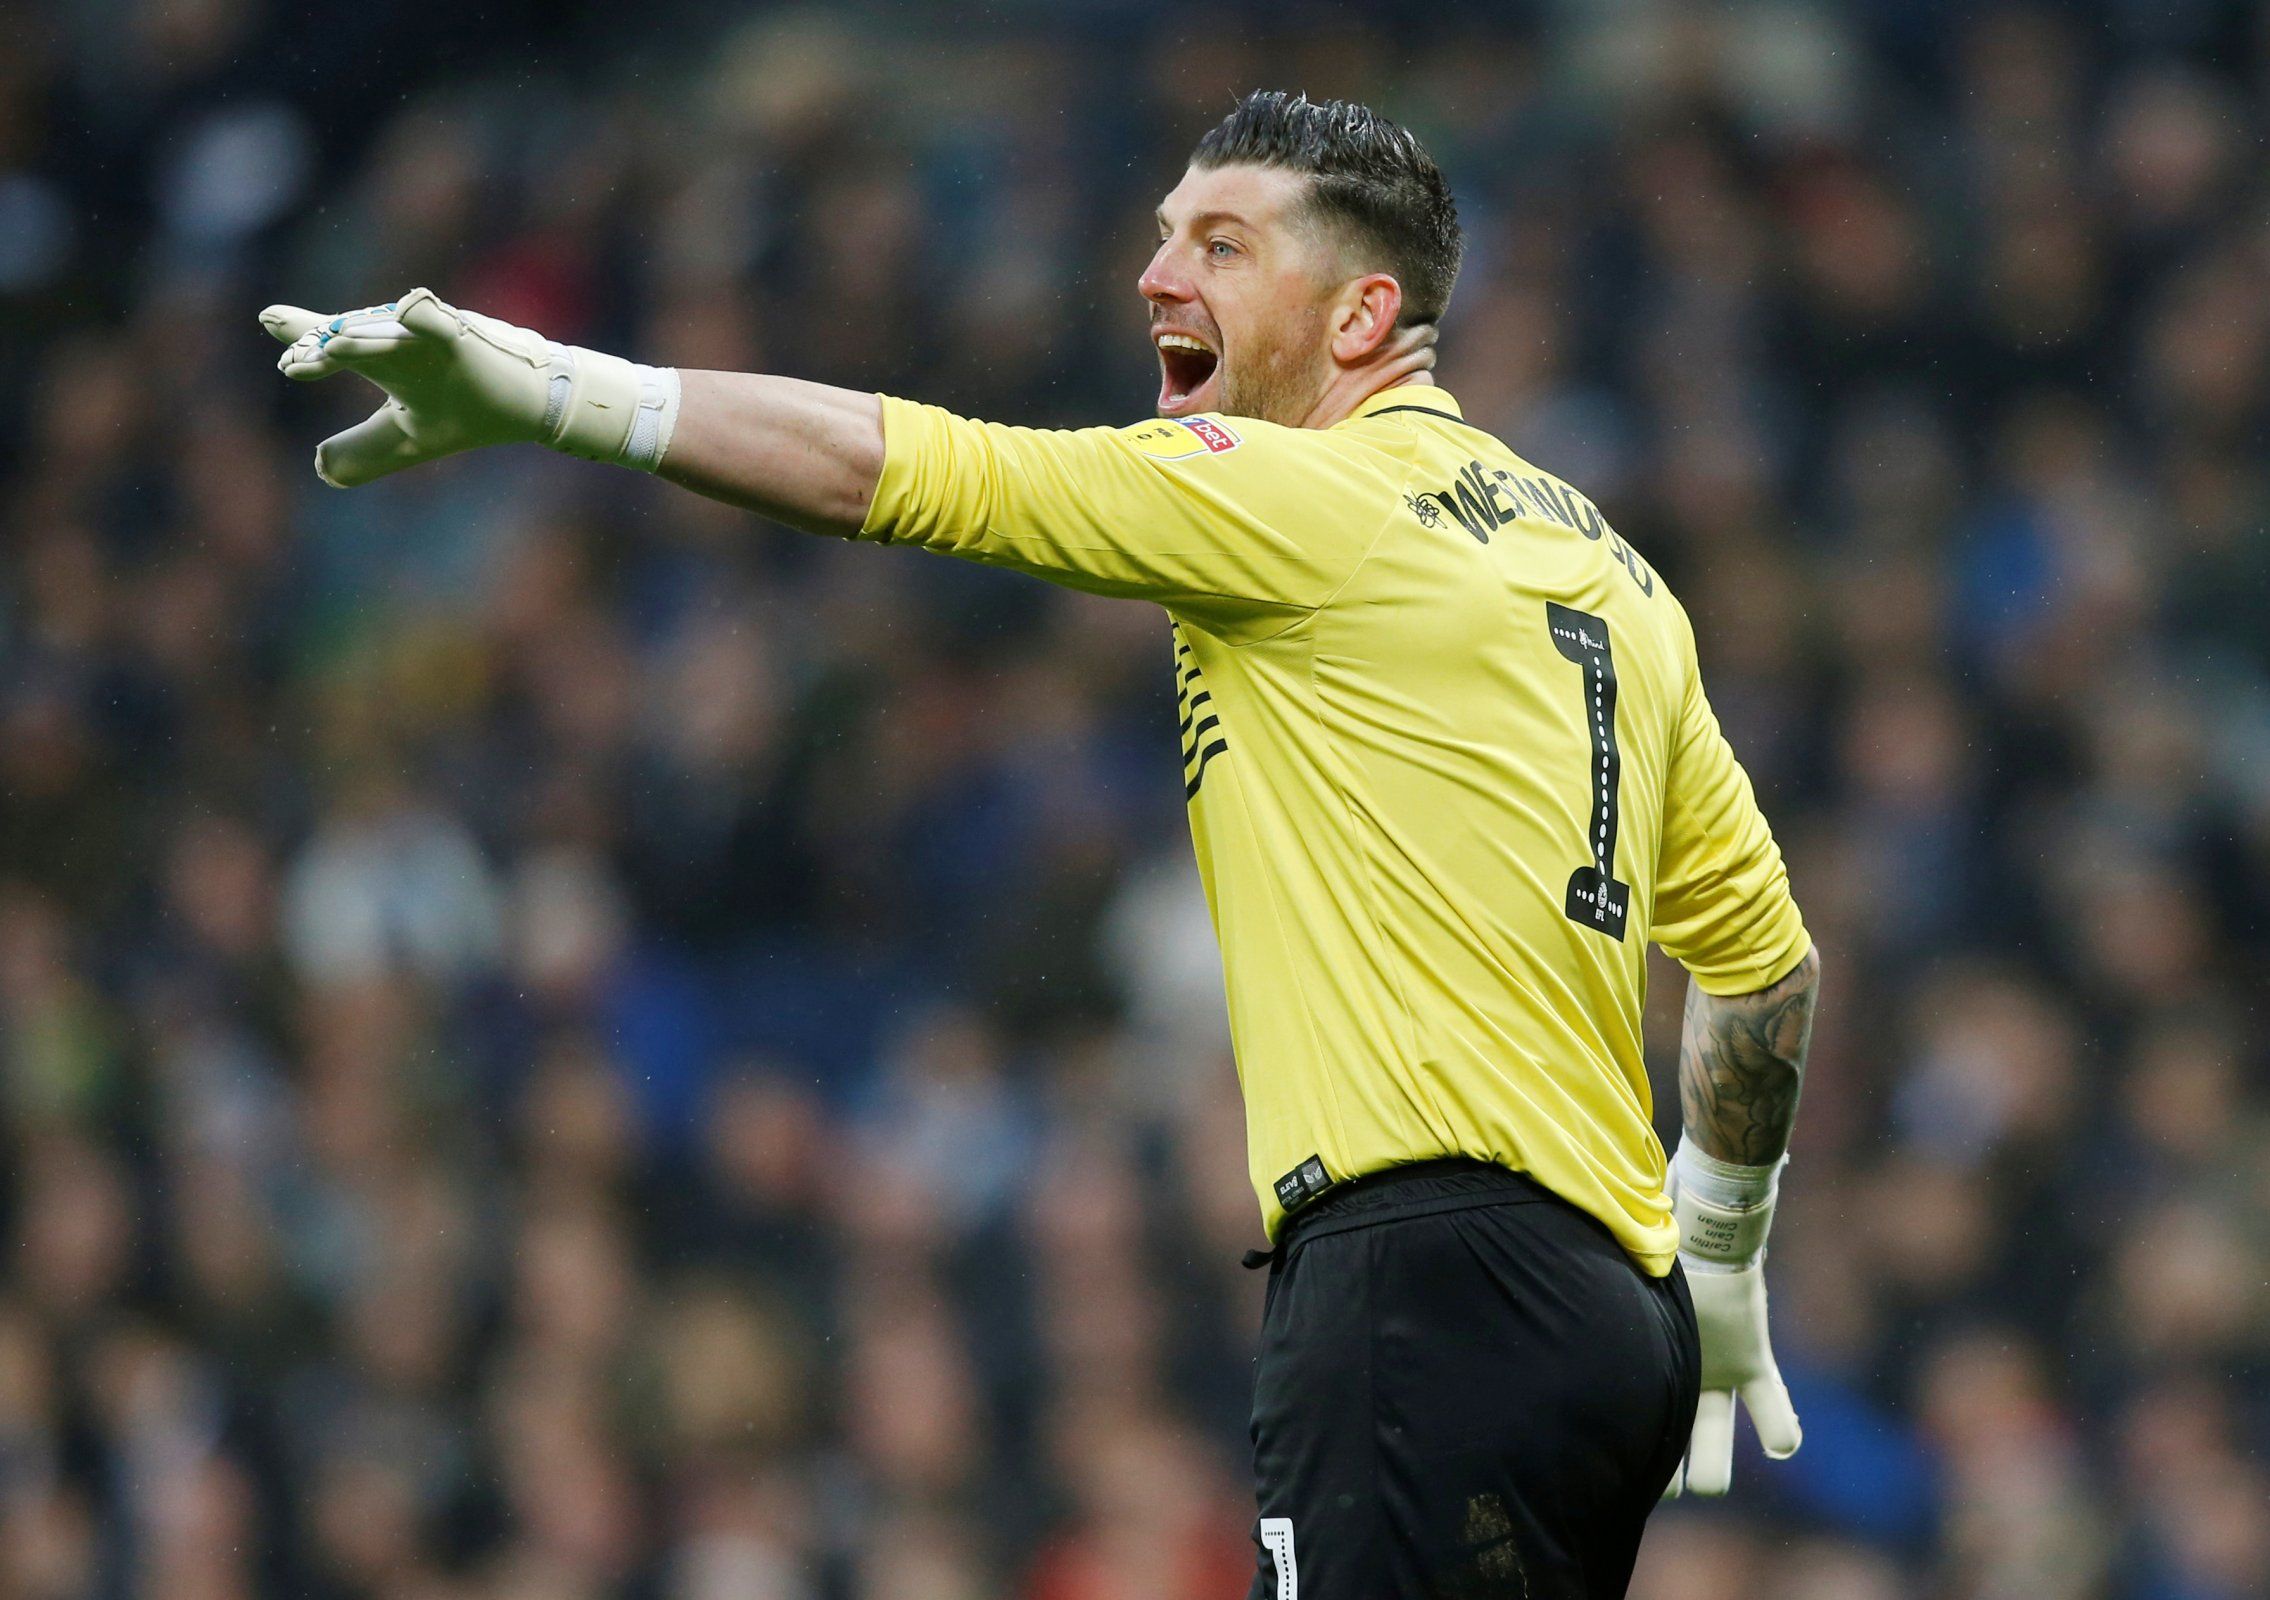 sheffield wednesday keiren westwood reacts vs west brom championship